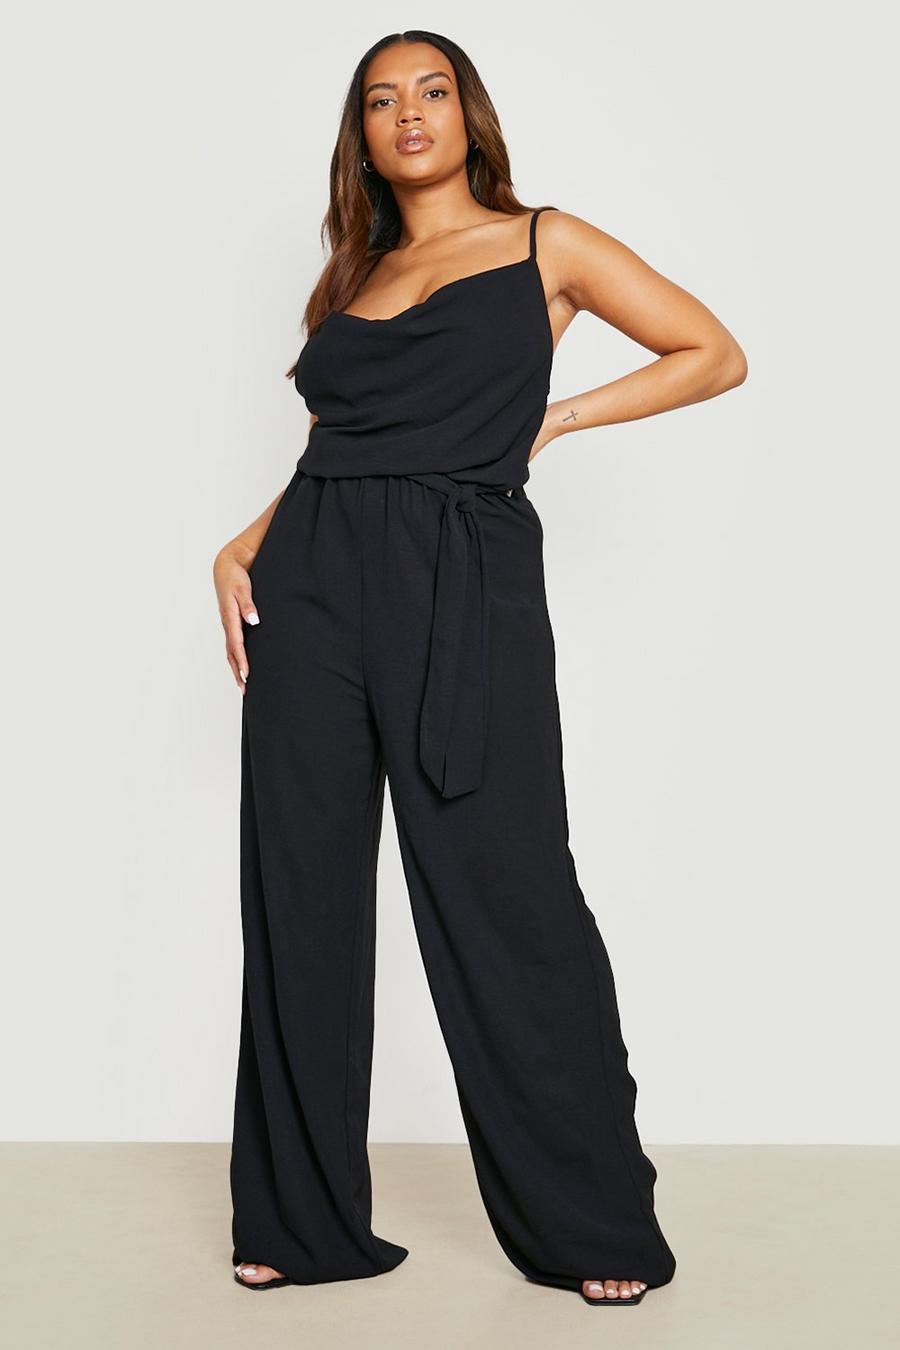 Plus Woven Strappy Cowl Neck Belted Jumpsuit | boohoo